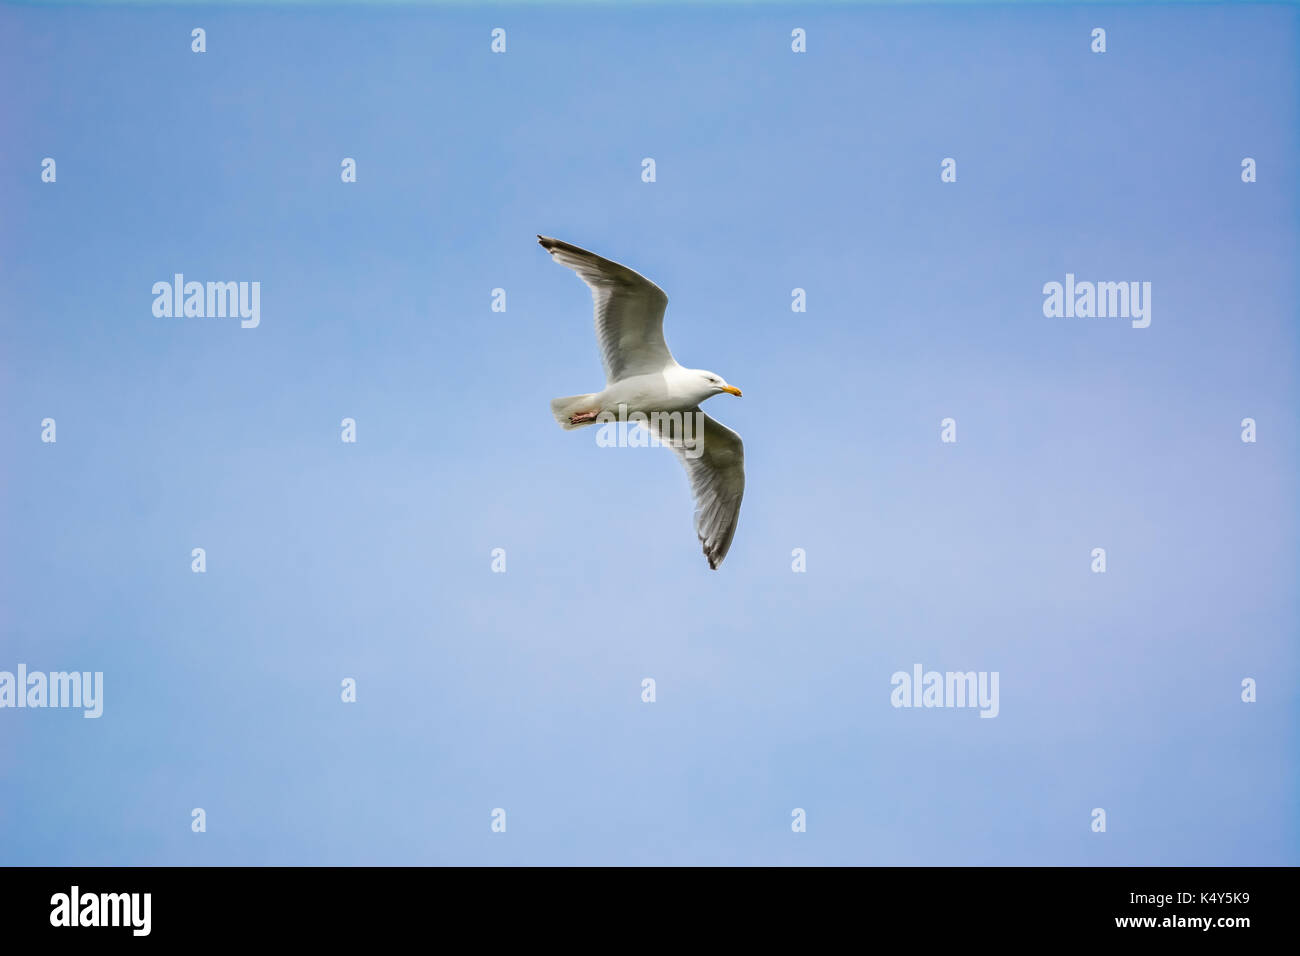 Seagull flying in the blue sky in Dyrholaey, Iceland on summer day. Stock Photo